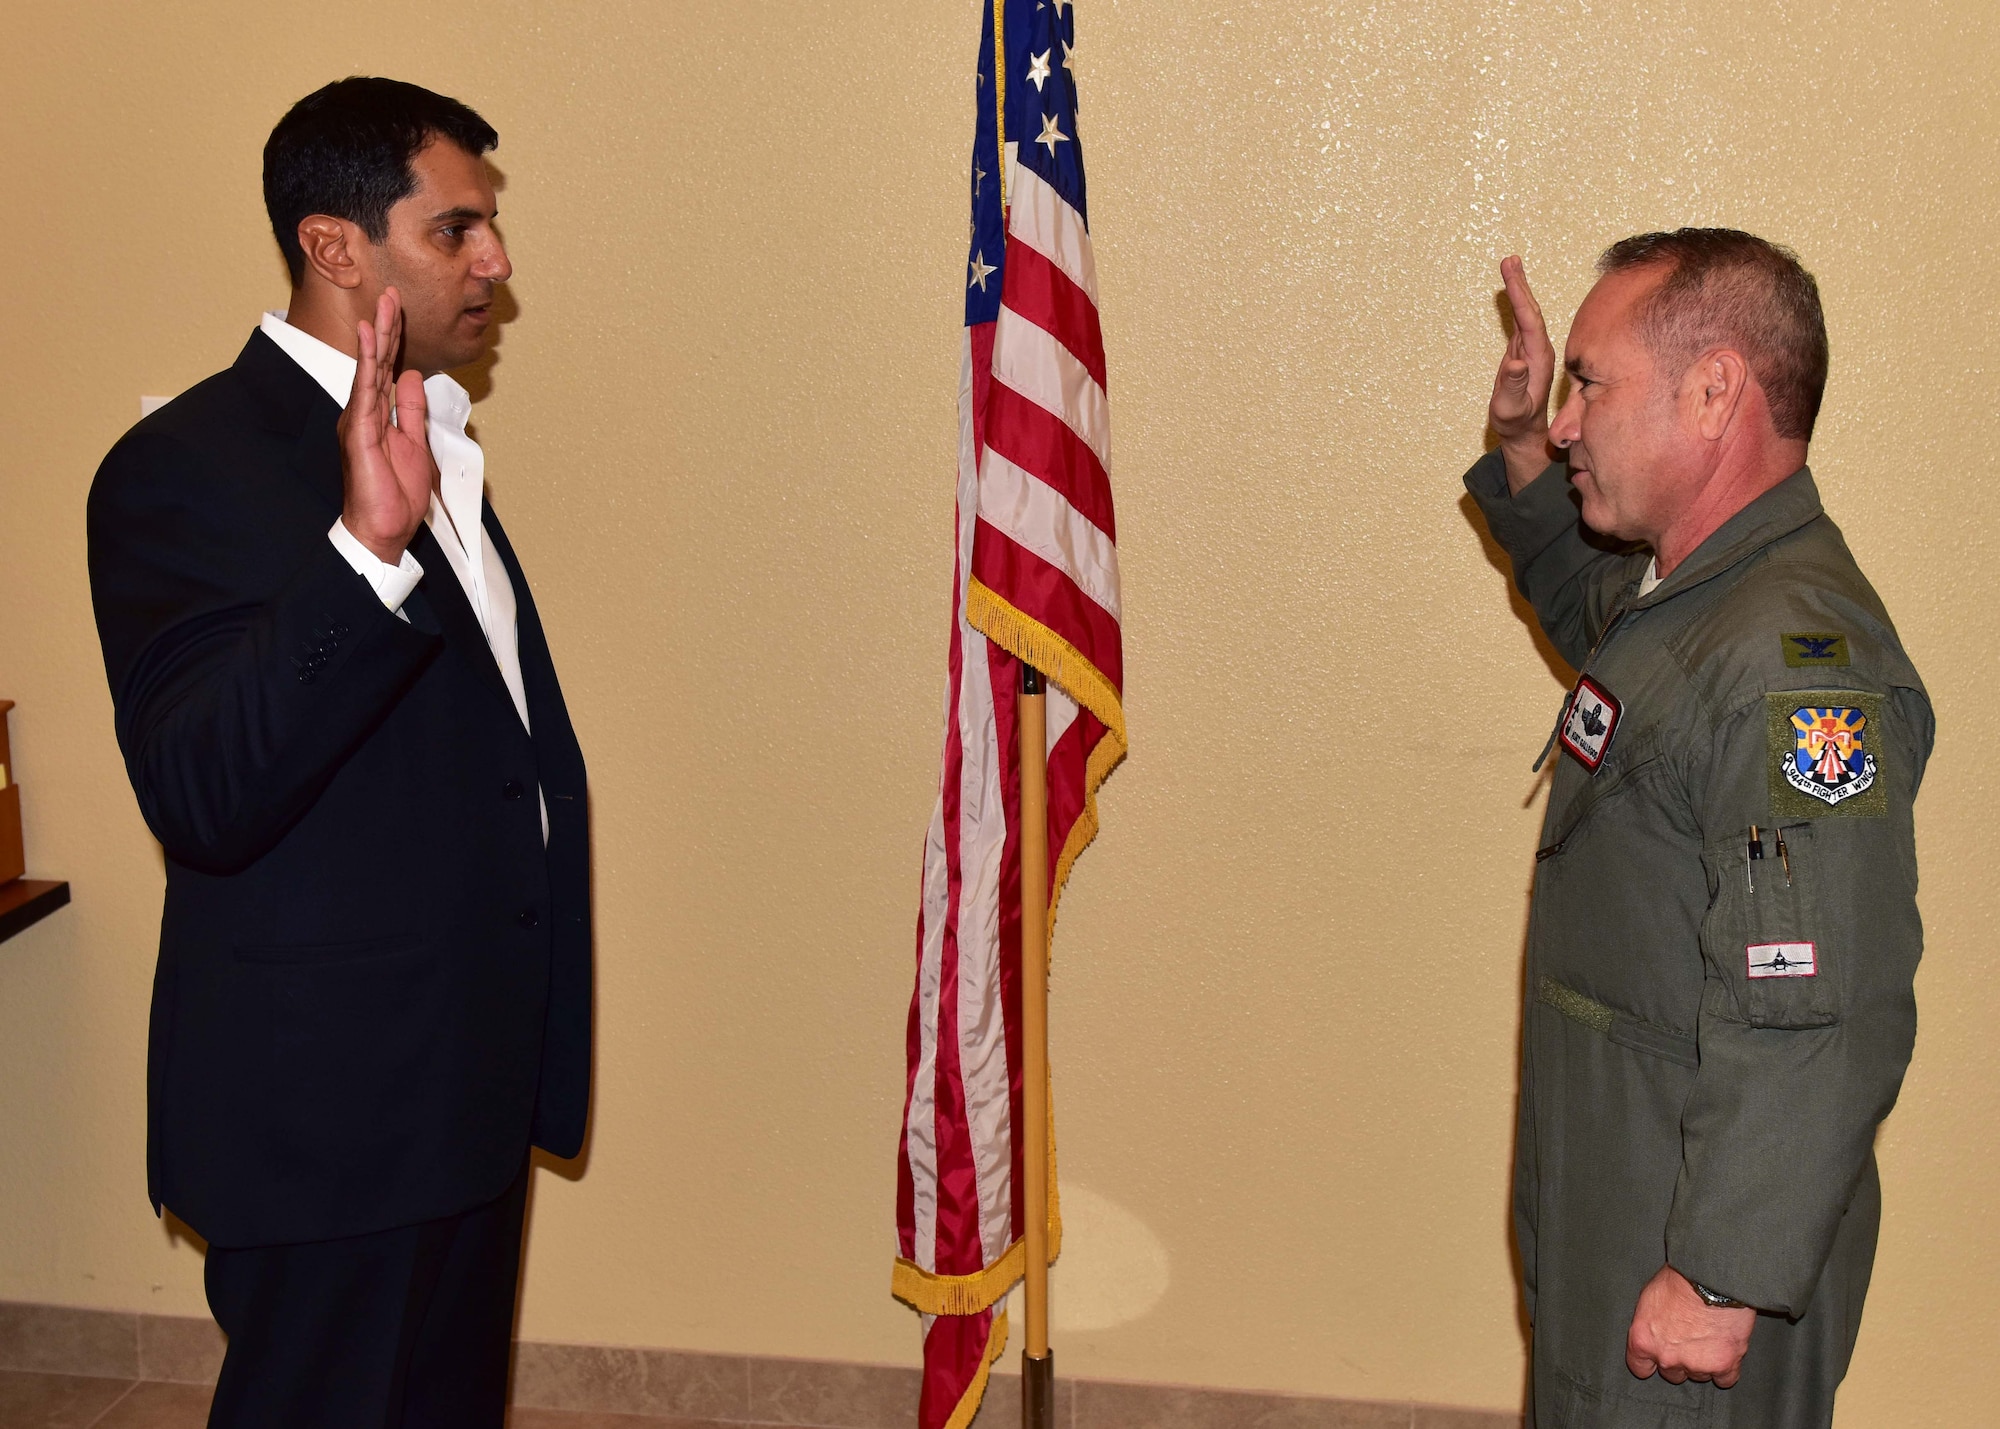 Dr. John Beshai, Arizona Mayo Clinic cardiologist and senior associate consultant, raises his right hand while Col. Kurt Gallegos, 944th Fighter Wing commander, tenders the Oath of Office during a short ceremony and welcomed Beshai to the unit Oct. 24, at Luke Air Force Base, Ariz. (U.S. Air Force photo taken by Tech. Sgt. Louis Vega Jr.)